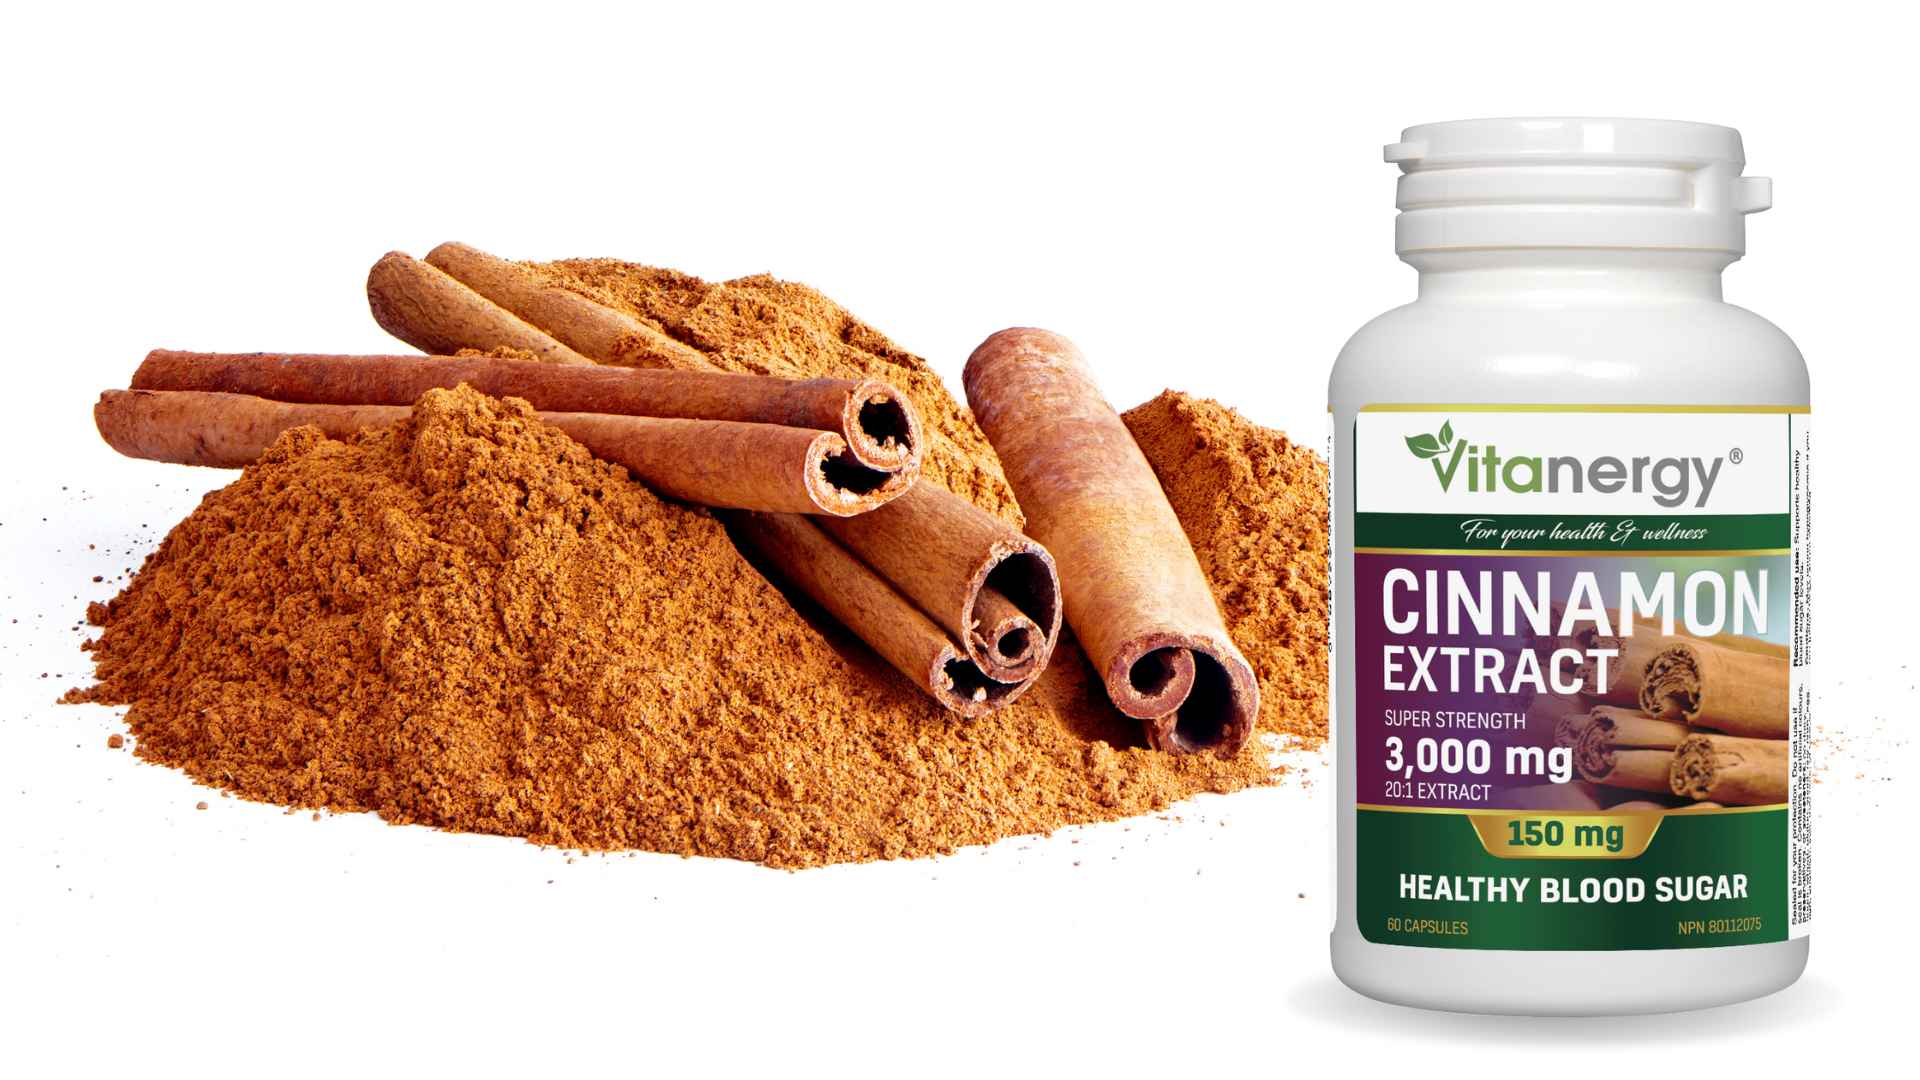 The Health Benefits of Cinnamon Extract: From Antioxidant Properties to Improved Metabolism